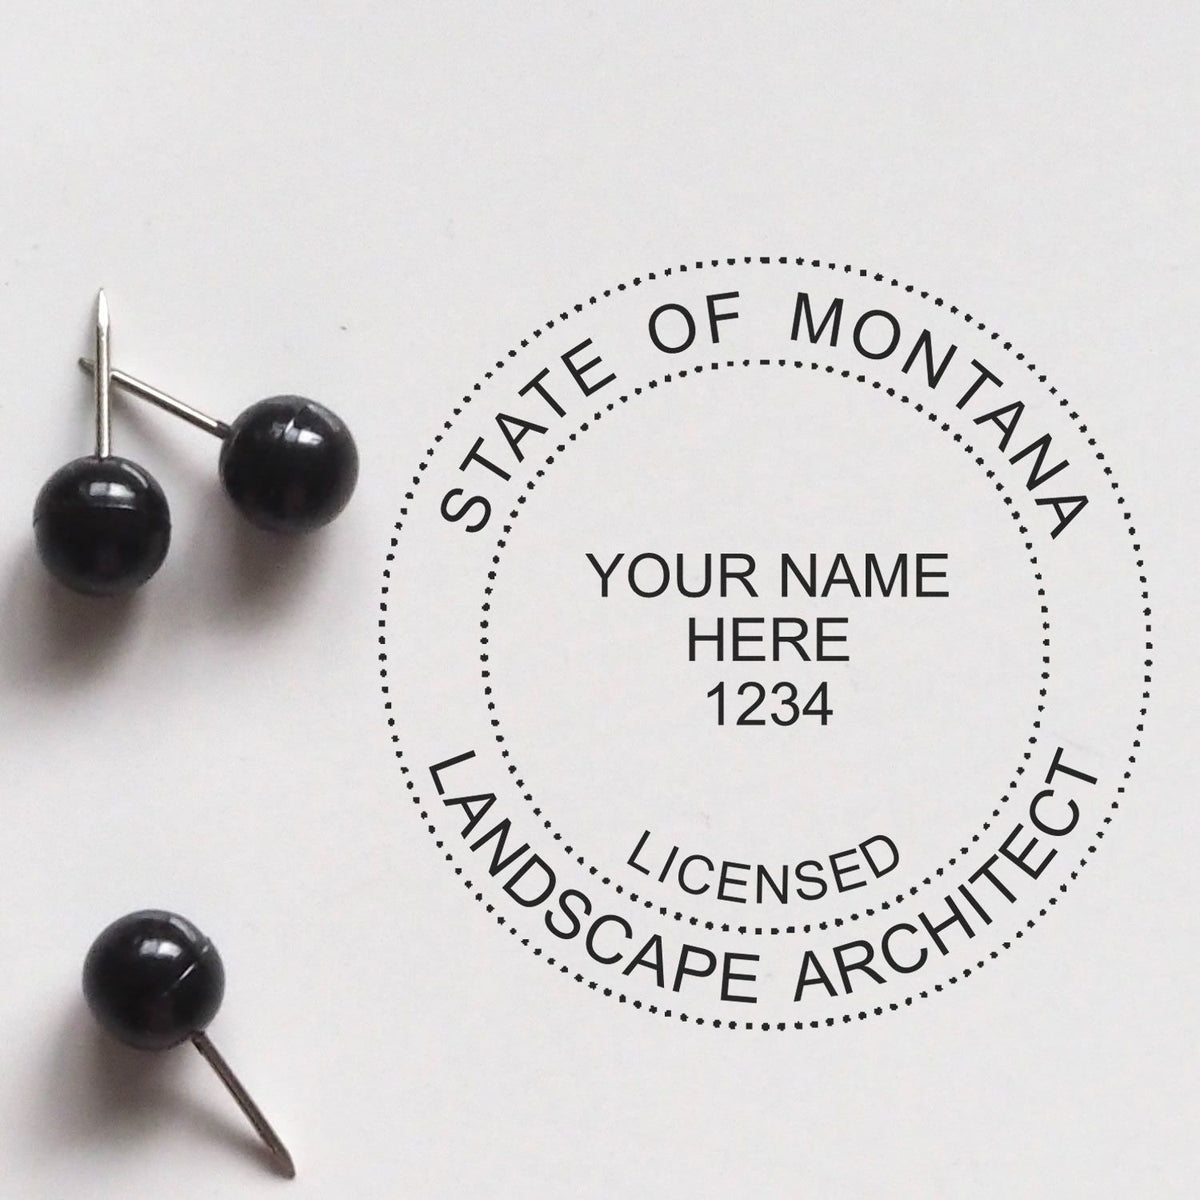 A lifestyle photo showing a stamped image of the Digital Montana Landscape Architect Stamp on a piece of paper